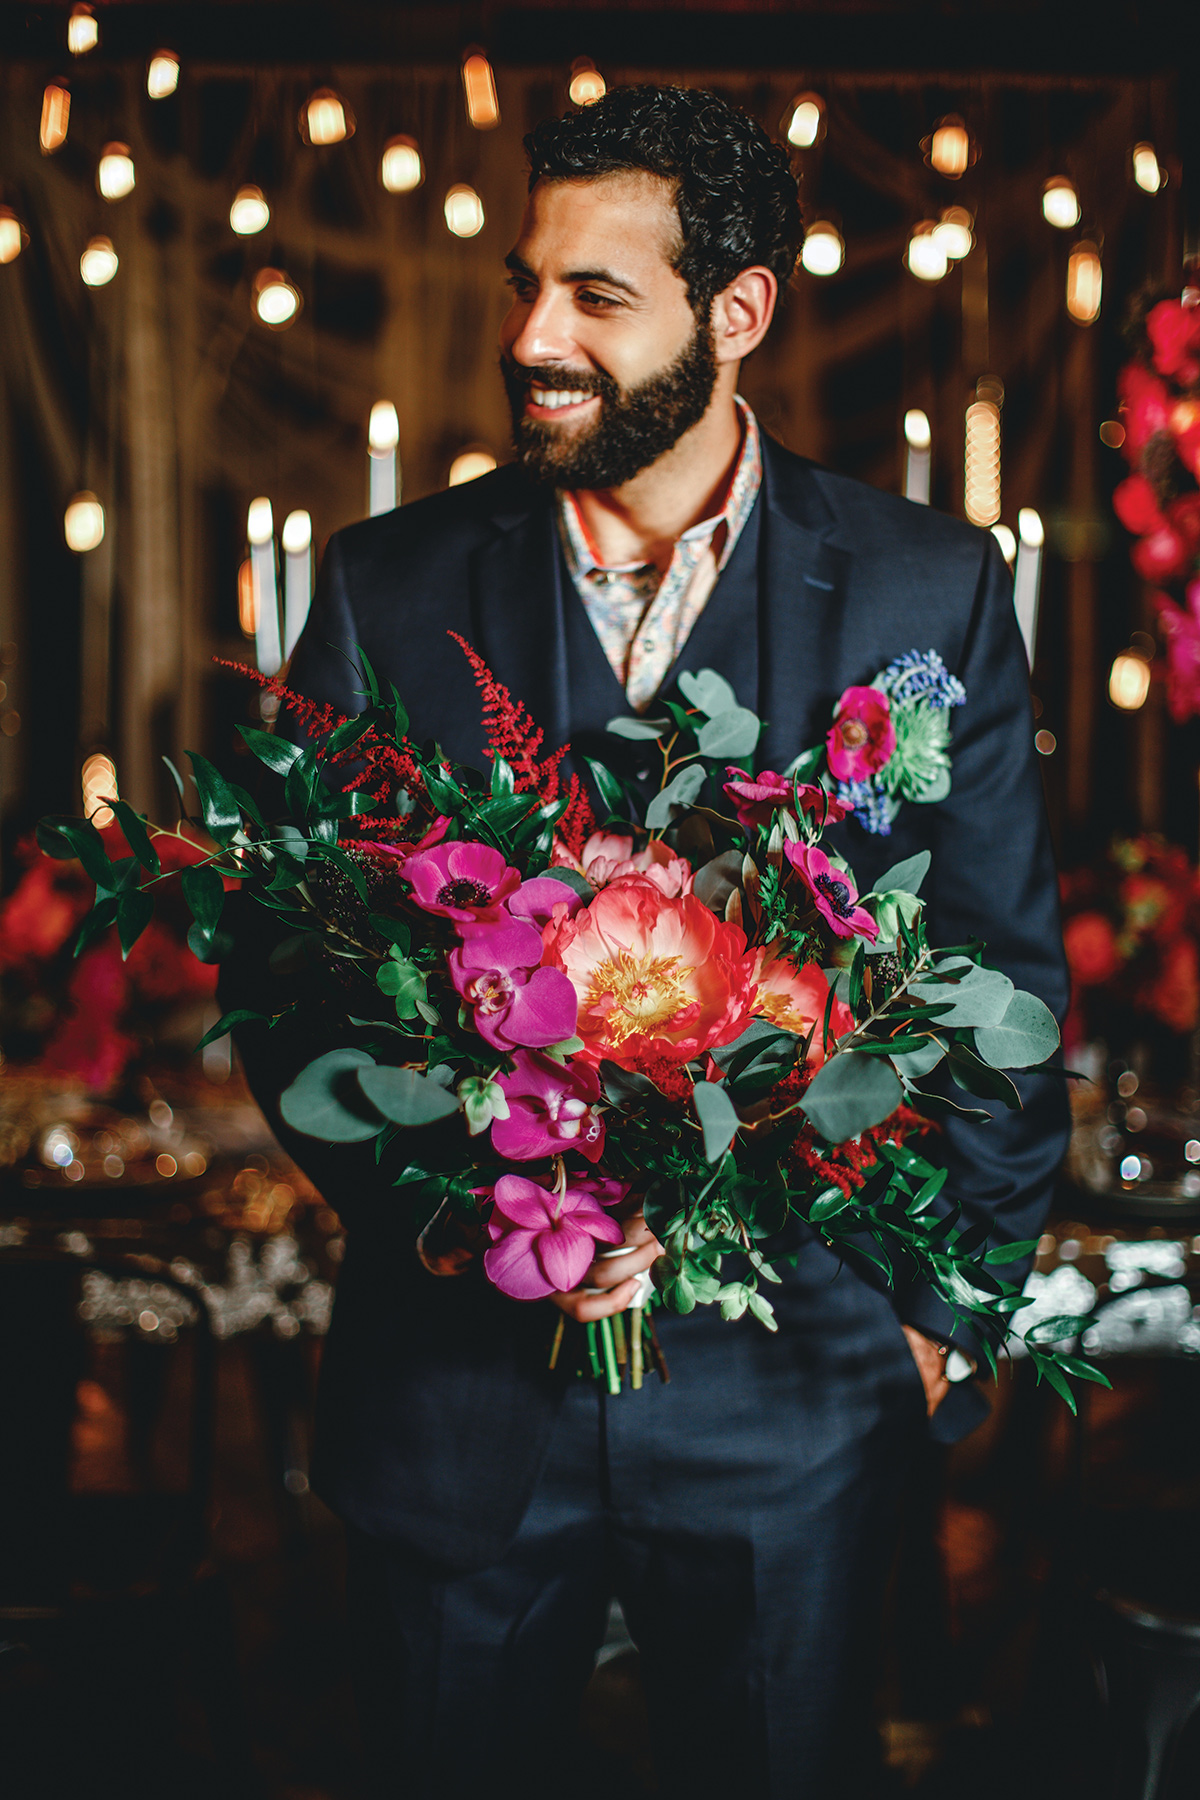 A styled shoot created for Weddings in Houston Magazine and Website - Kat Creech Events, Ama Photogr